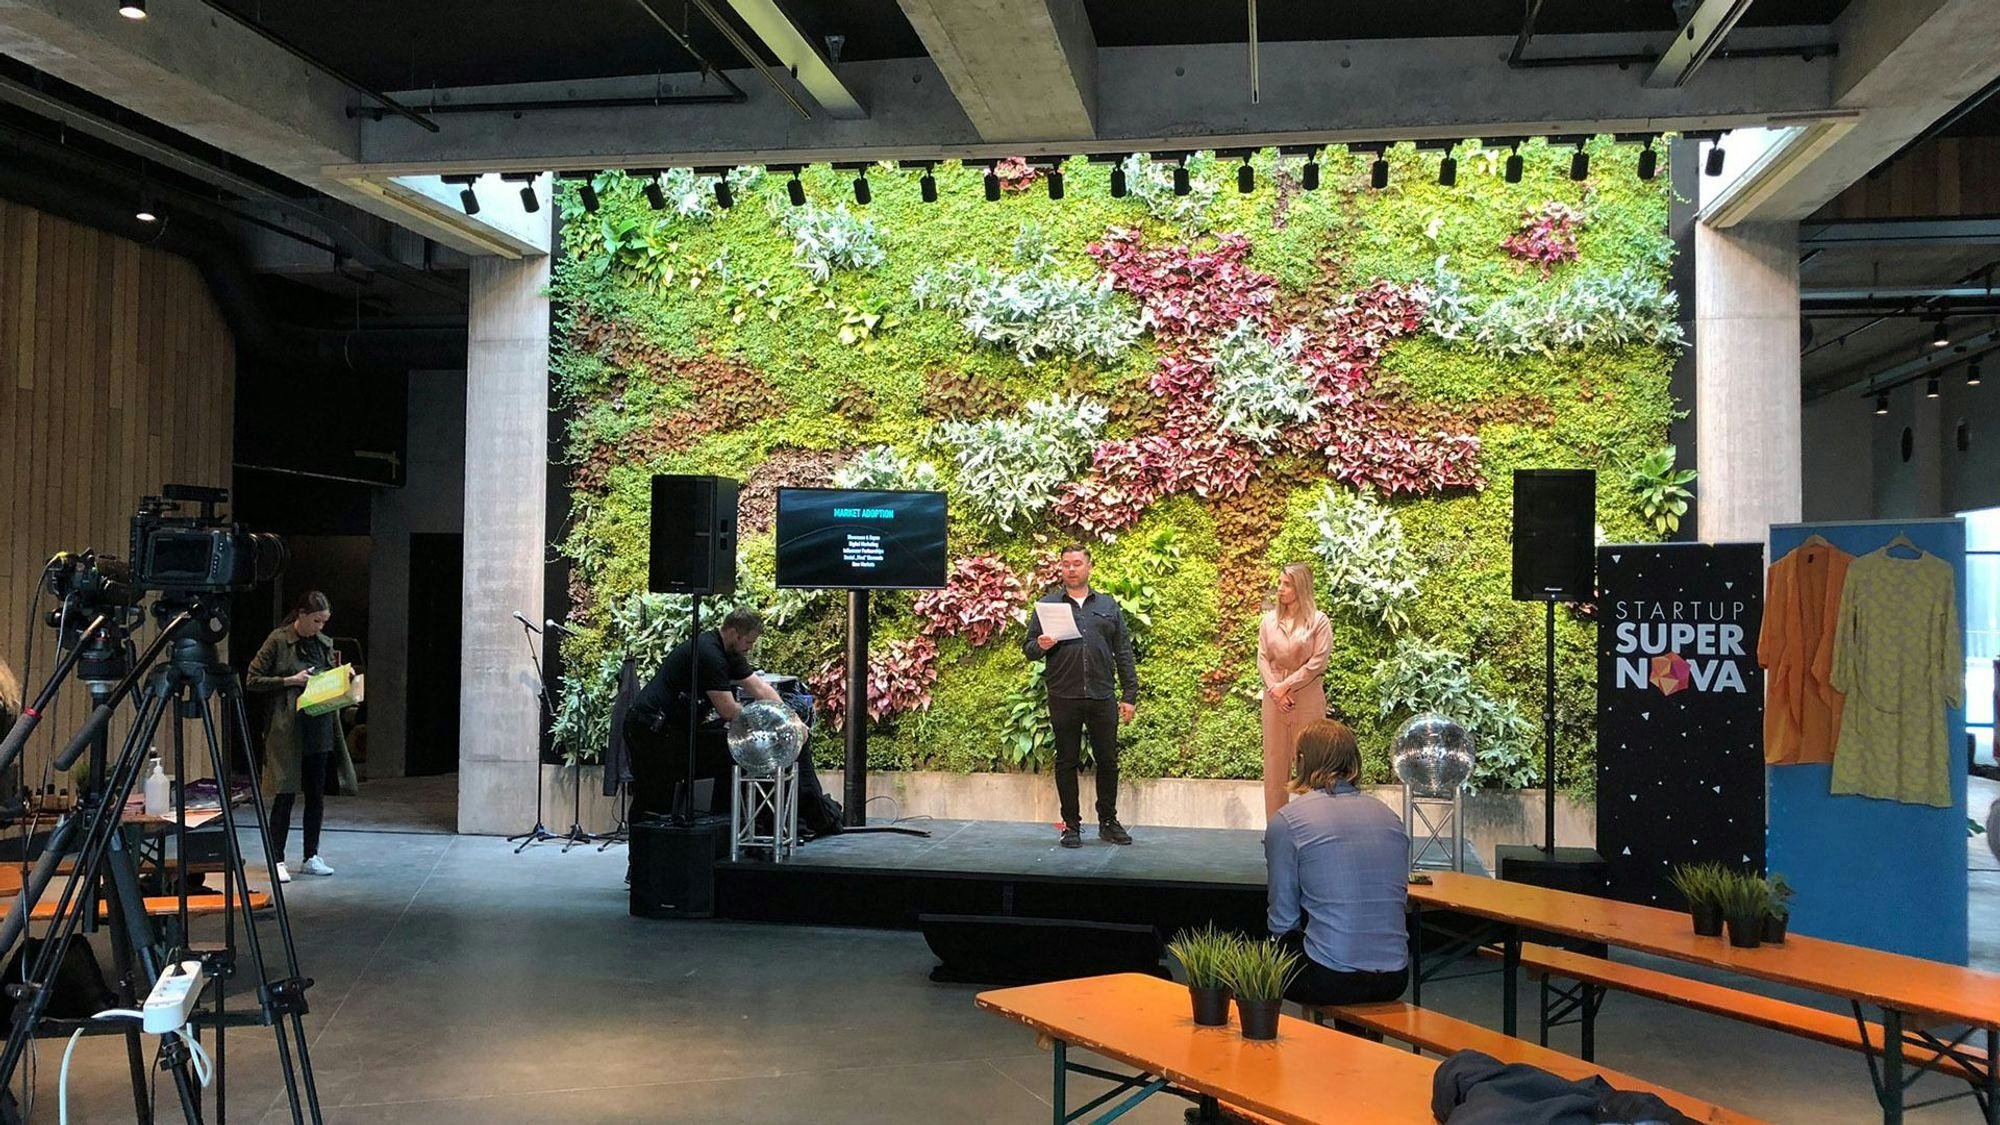 An indoor event with a man speaking next to a woman on a stage and a vertical garden wall as a backdrop